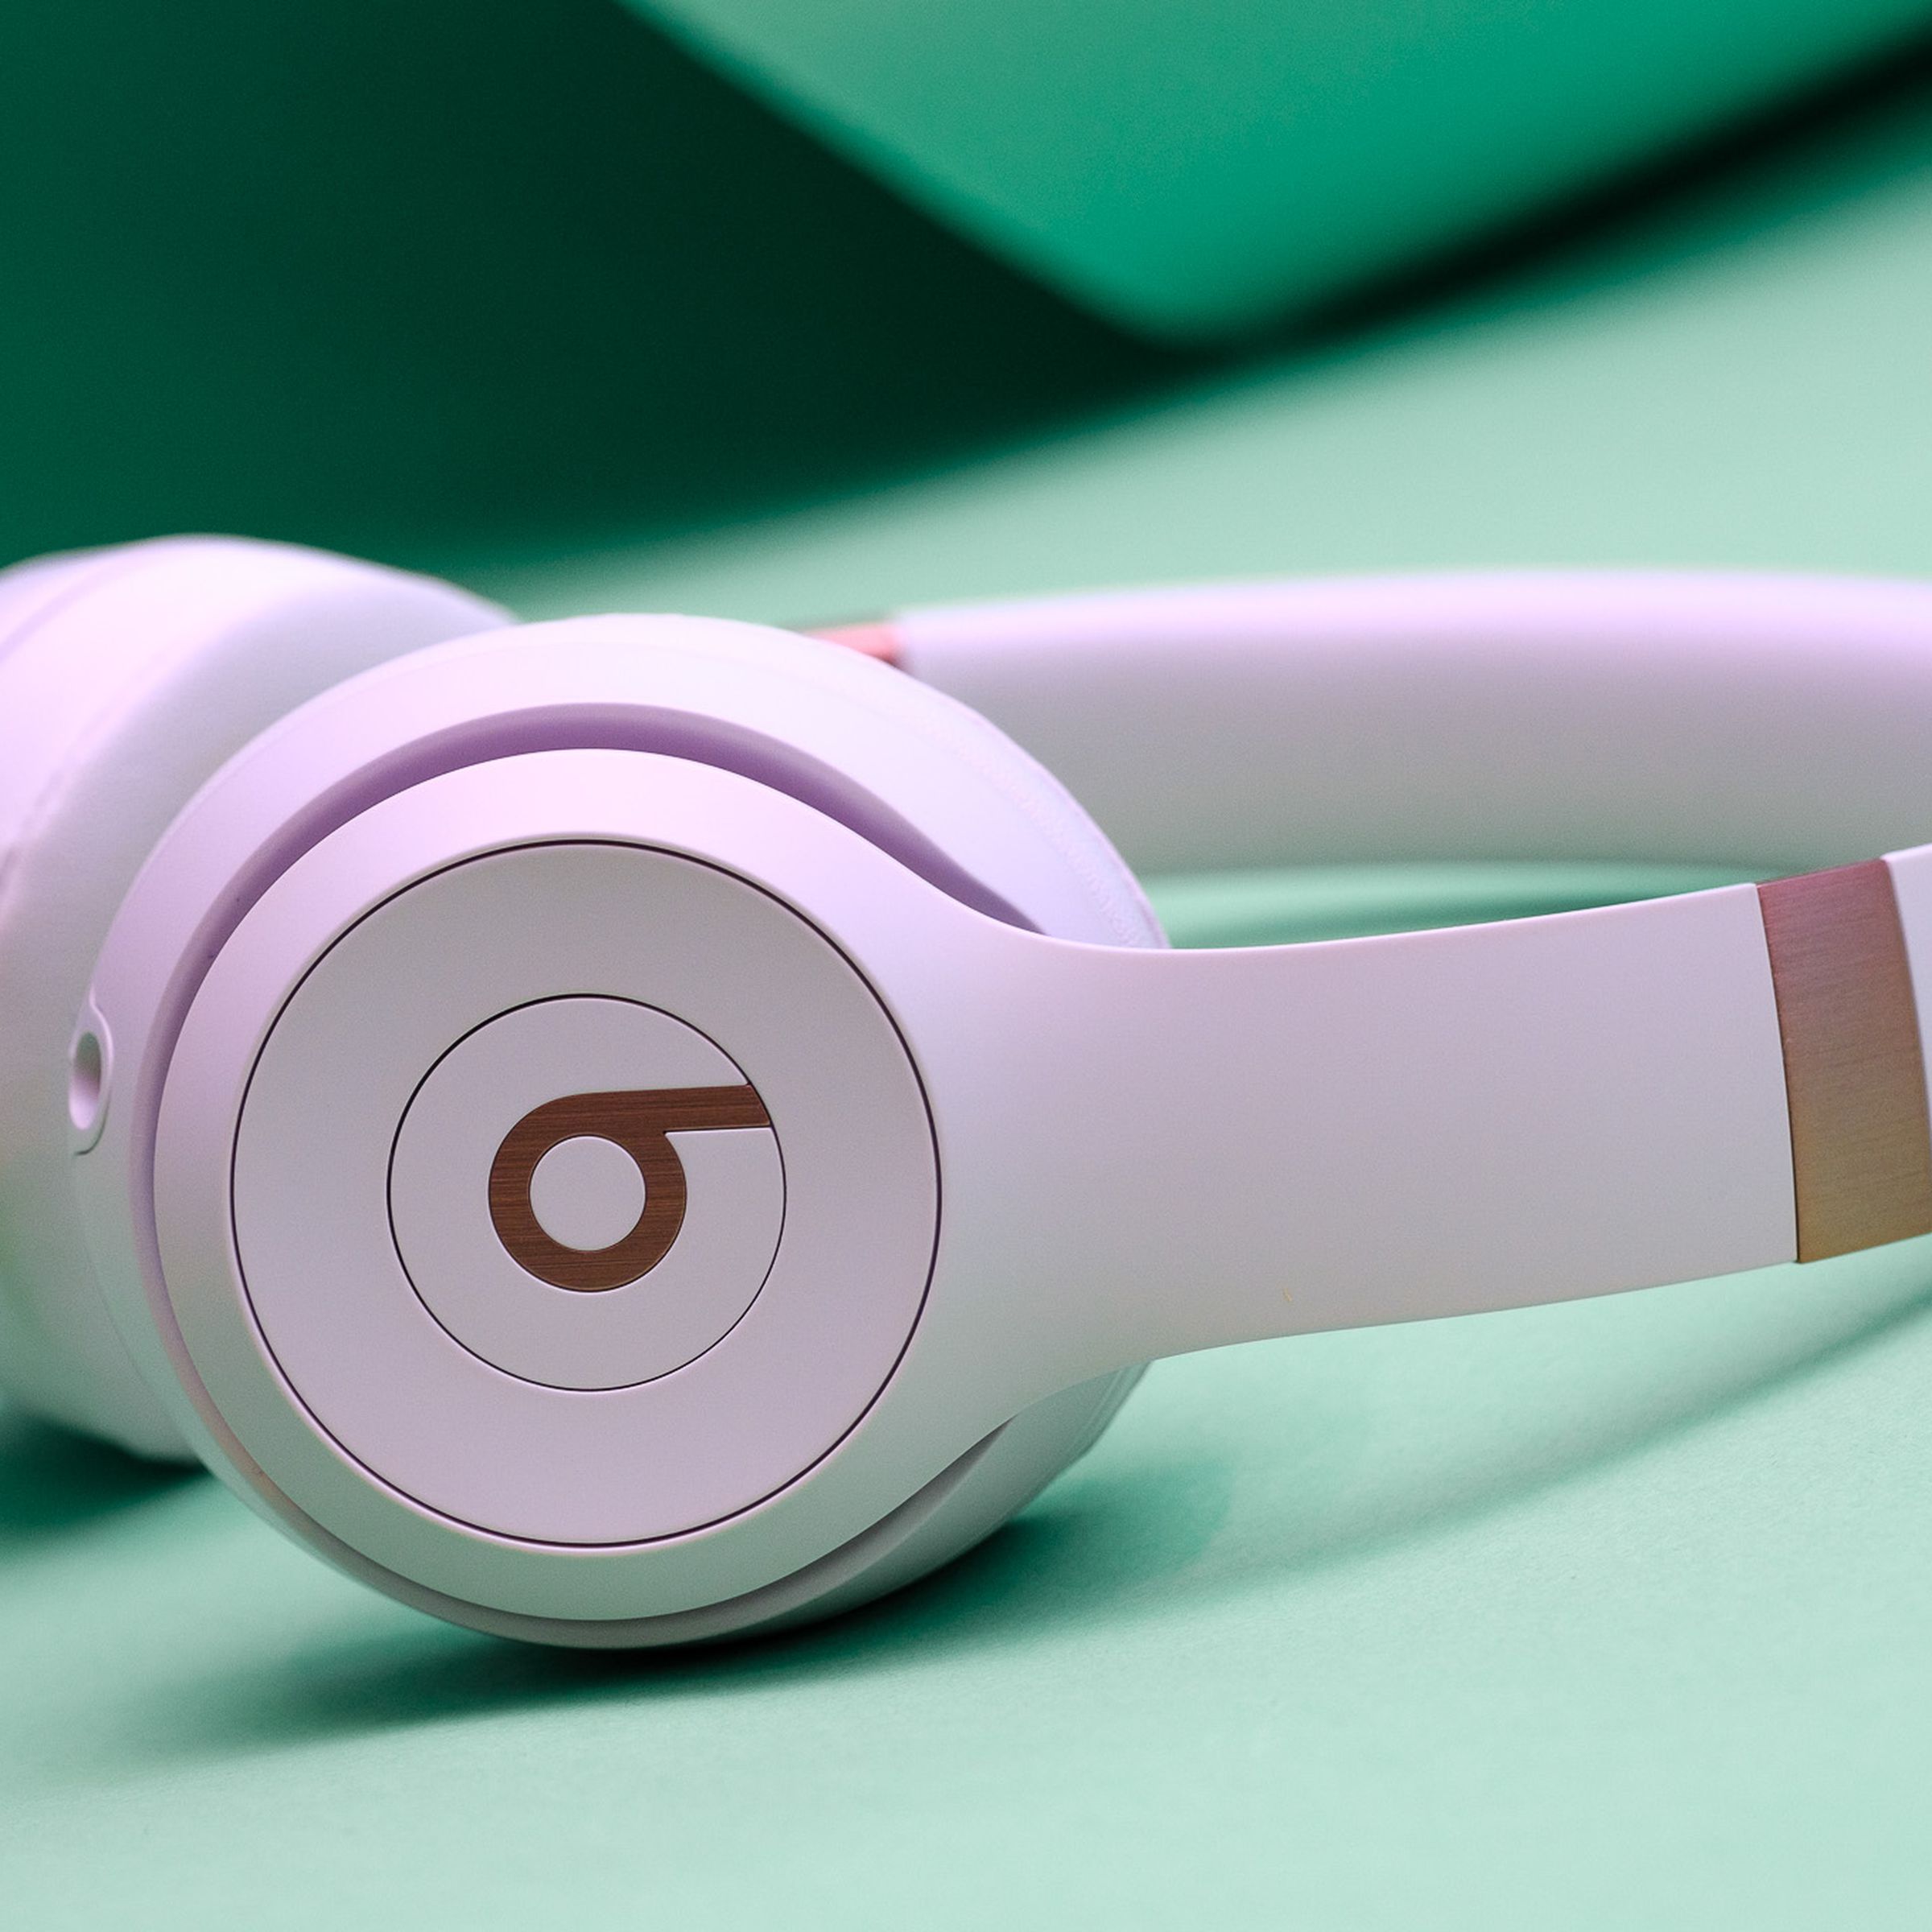 A photo of the Beats Solo 4 wireless headphones.